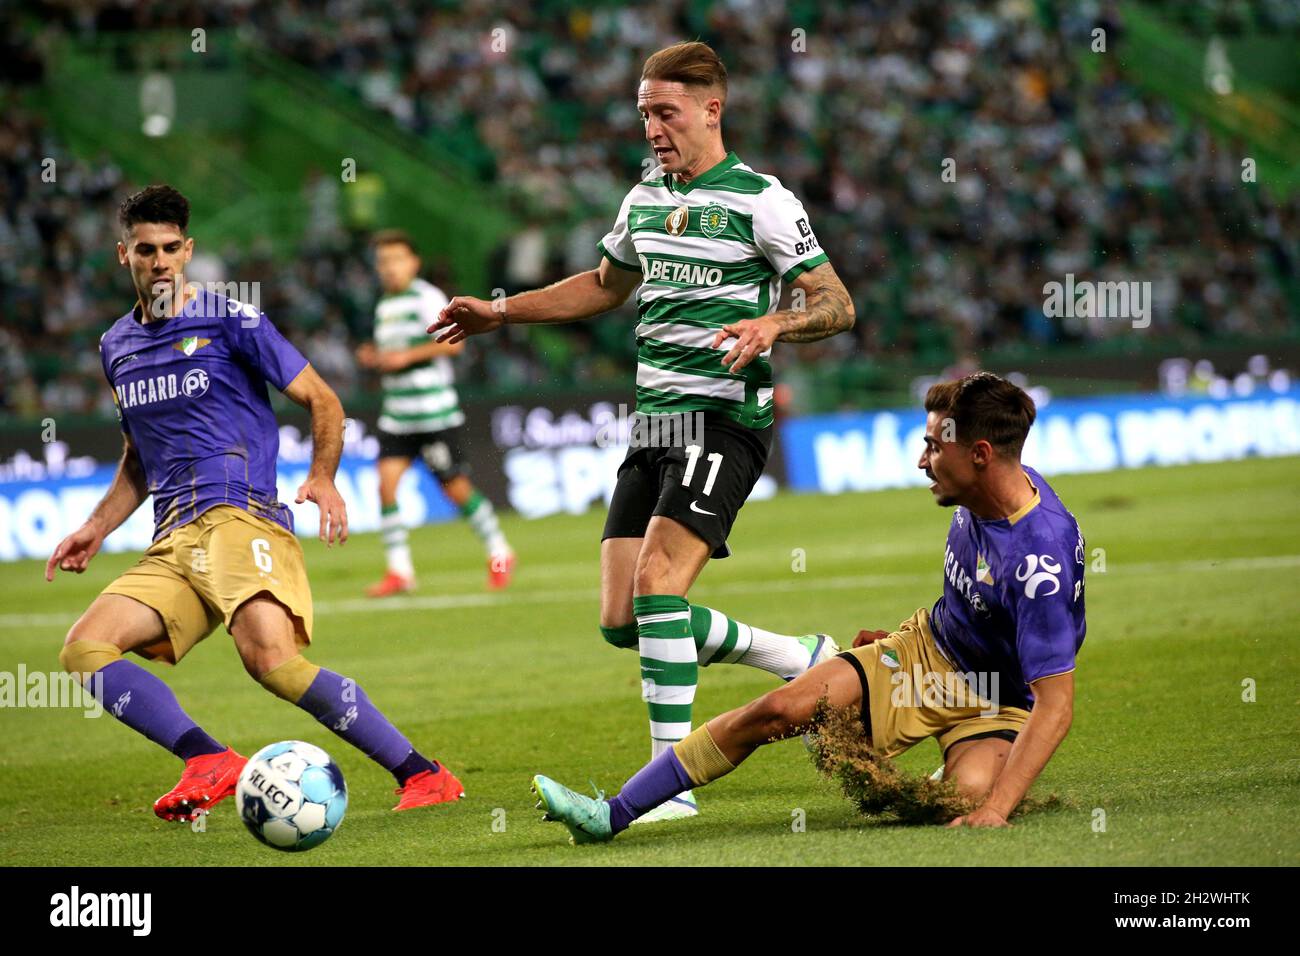 LISBON, PORTUGAL - OCTOBER 23: Nuno Santos of Sporting CP competes for the ball with Fabio Pacheco and Rodrigo Conceicao of Moreirense FC ,during the Liga Portugal Bwin match between Sporting CP and Moreirense FC at Estadio Jose Alvalade on October 23, 2021 in Lisbon, Portugal. (Photo by MB Media) Stock Photo